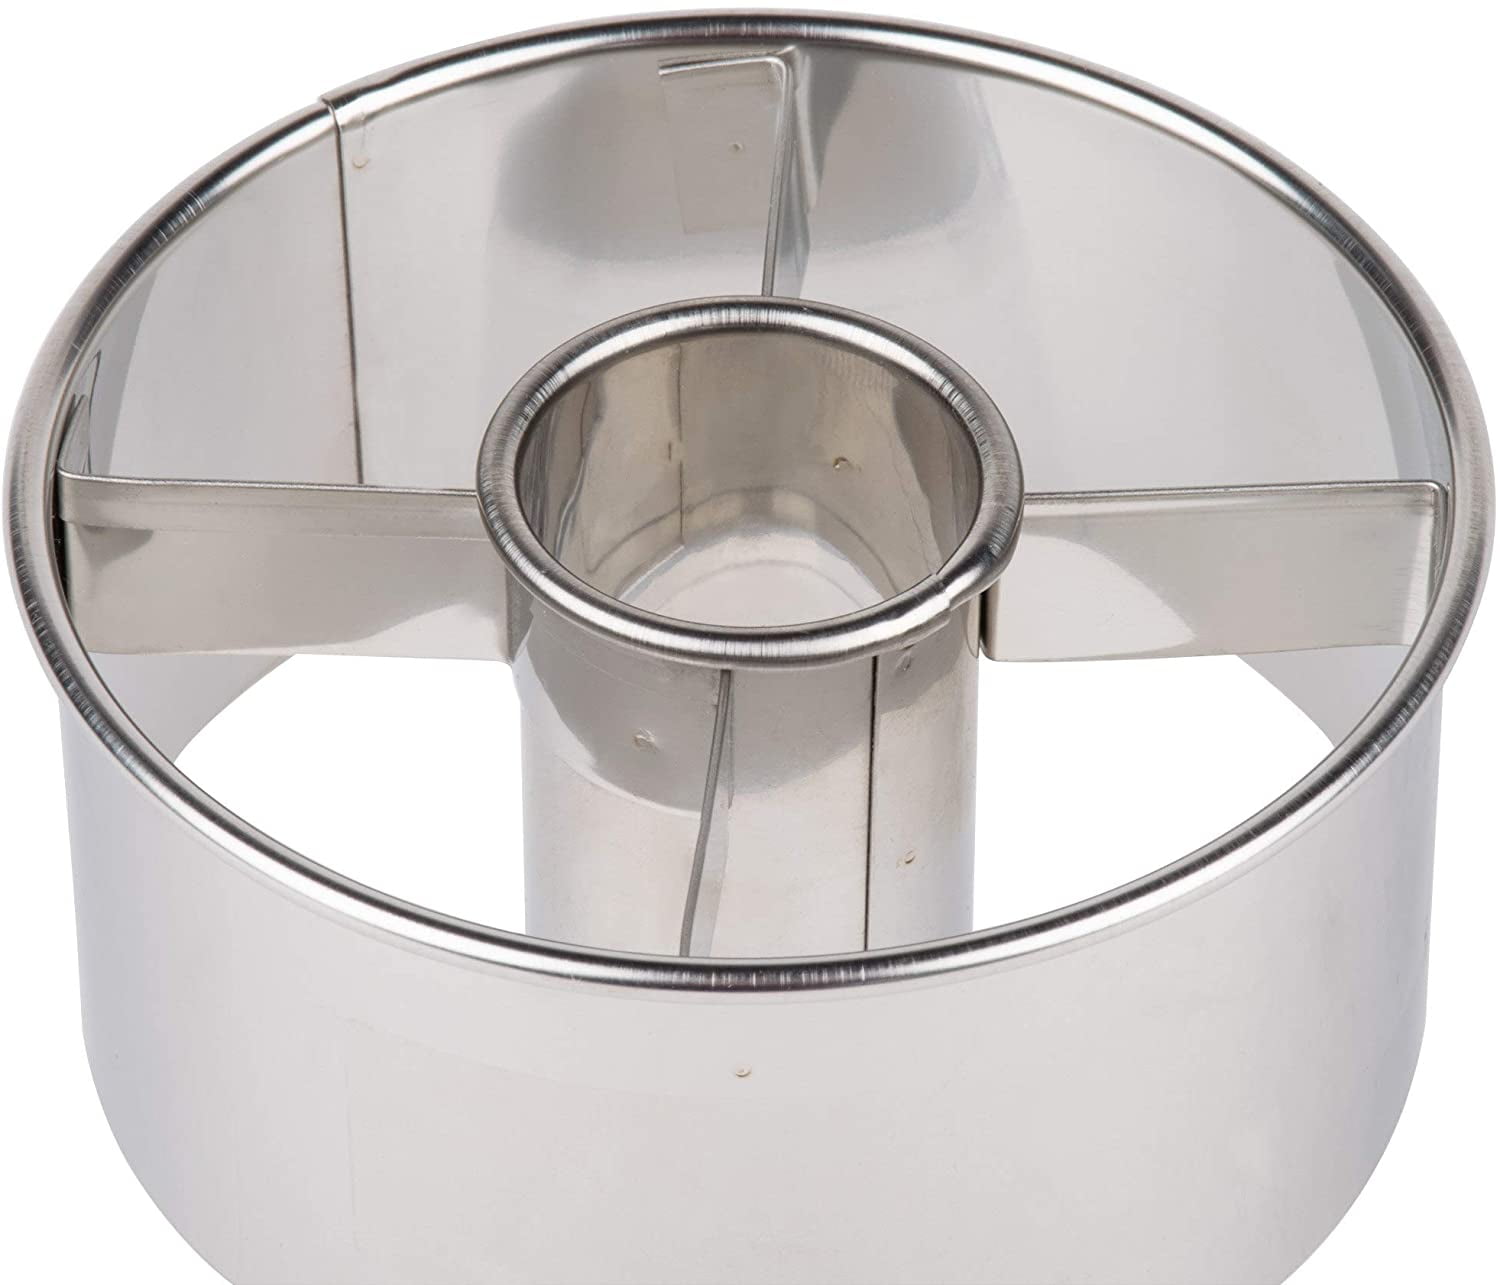 Bakeware Ateco 14404 Round Stainless Steel Cake Ring 6 PC Bakery Cutter 4.5" 